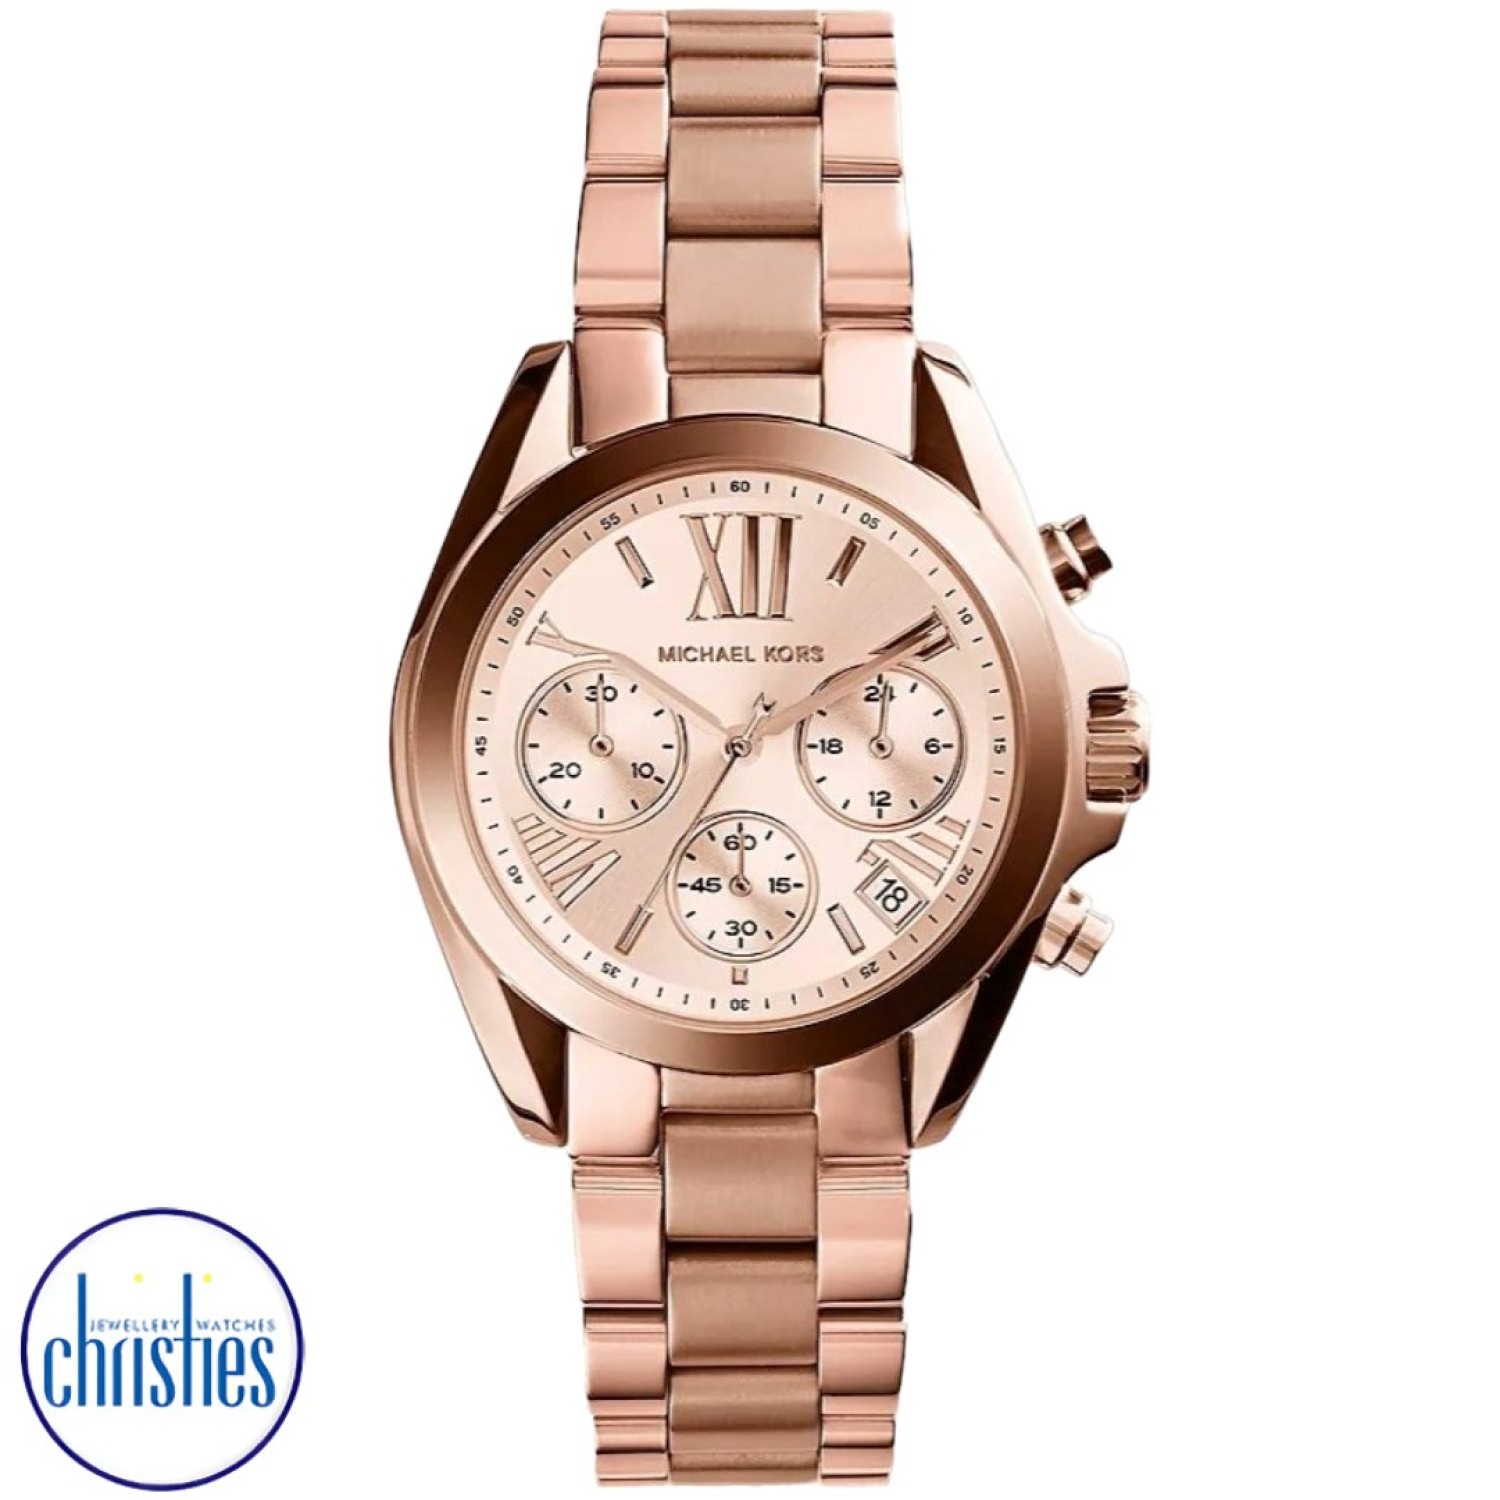 MK5799 Michael Kors Womens Mini Chronograph Bradshaw Watch. From the Bradshaw Mini range this model is made from IP rose gold plated steel and has a round case shape. It has a champagne colour dial with combination hour markers in gold, slender gold hands